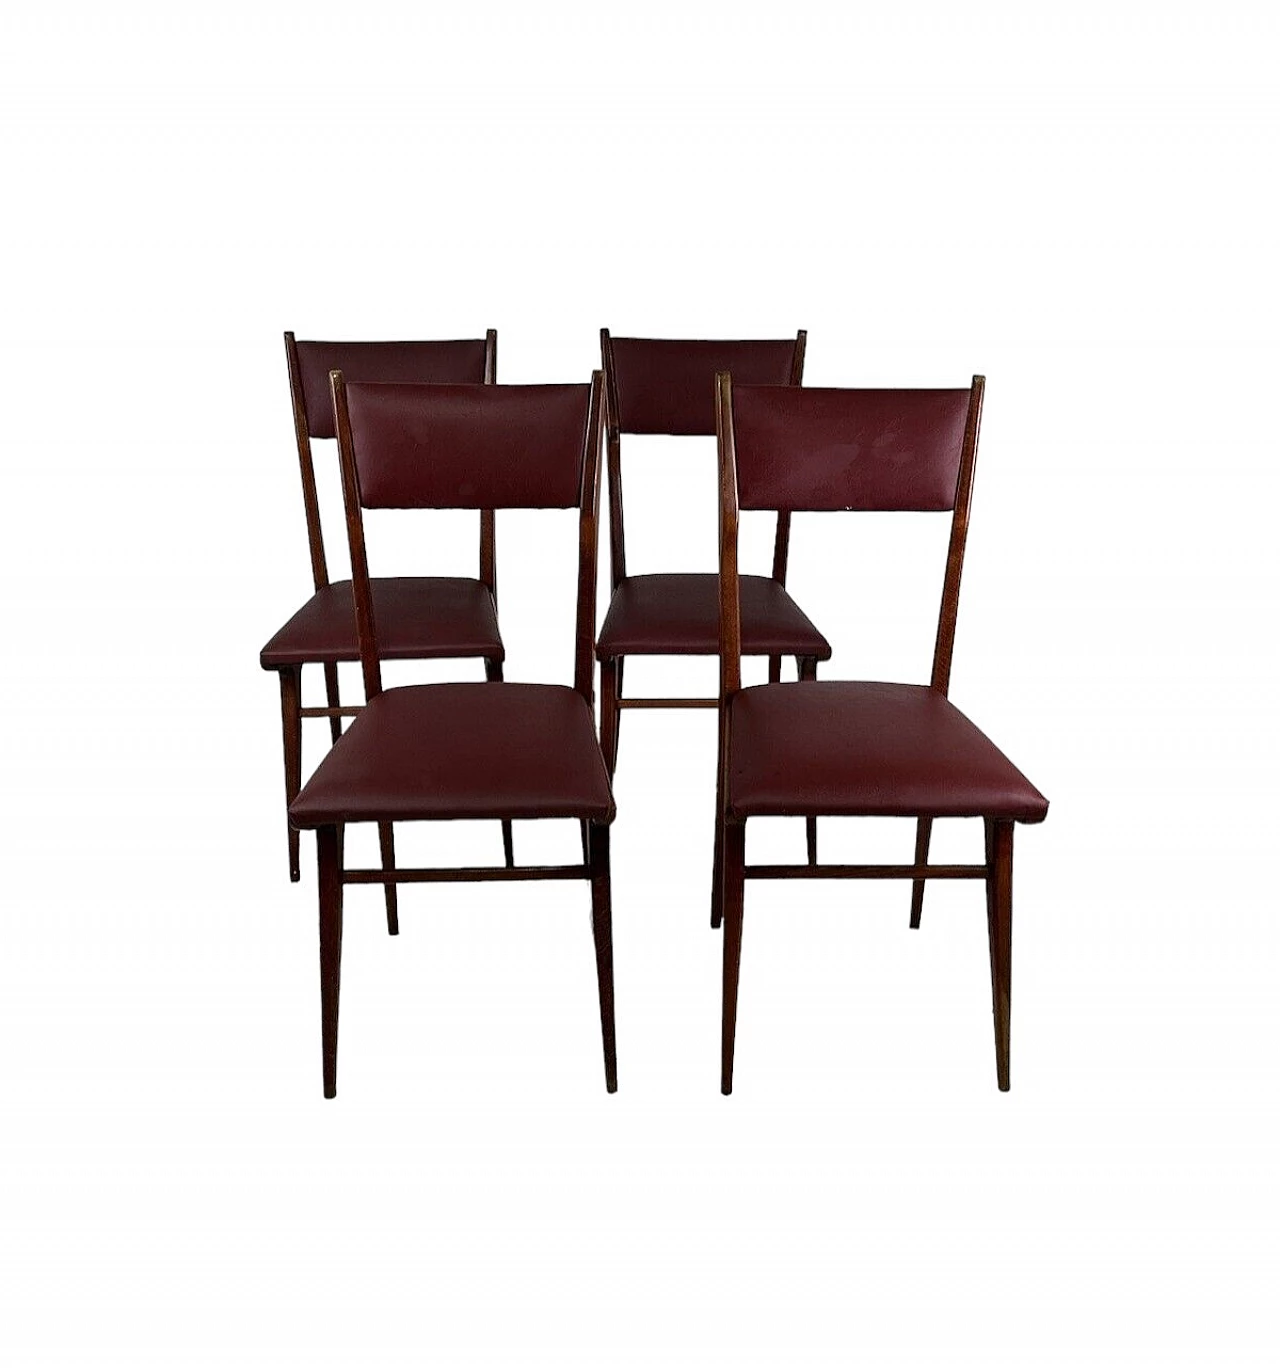 4 Chairs in wood and burgundy leatherette, 1950s 14